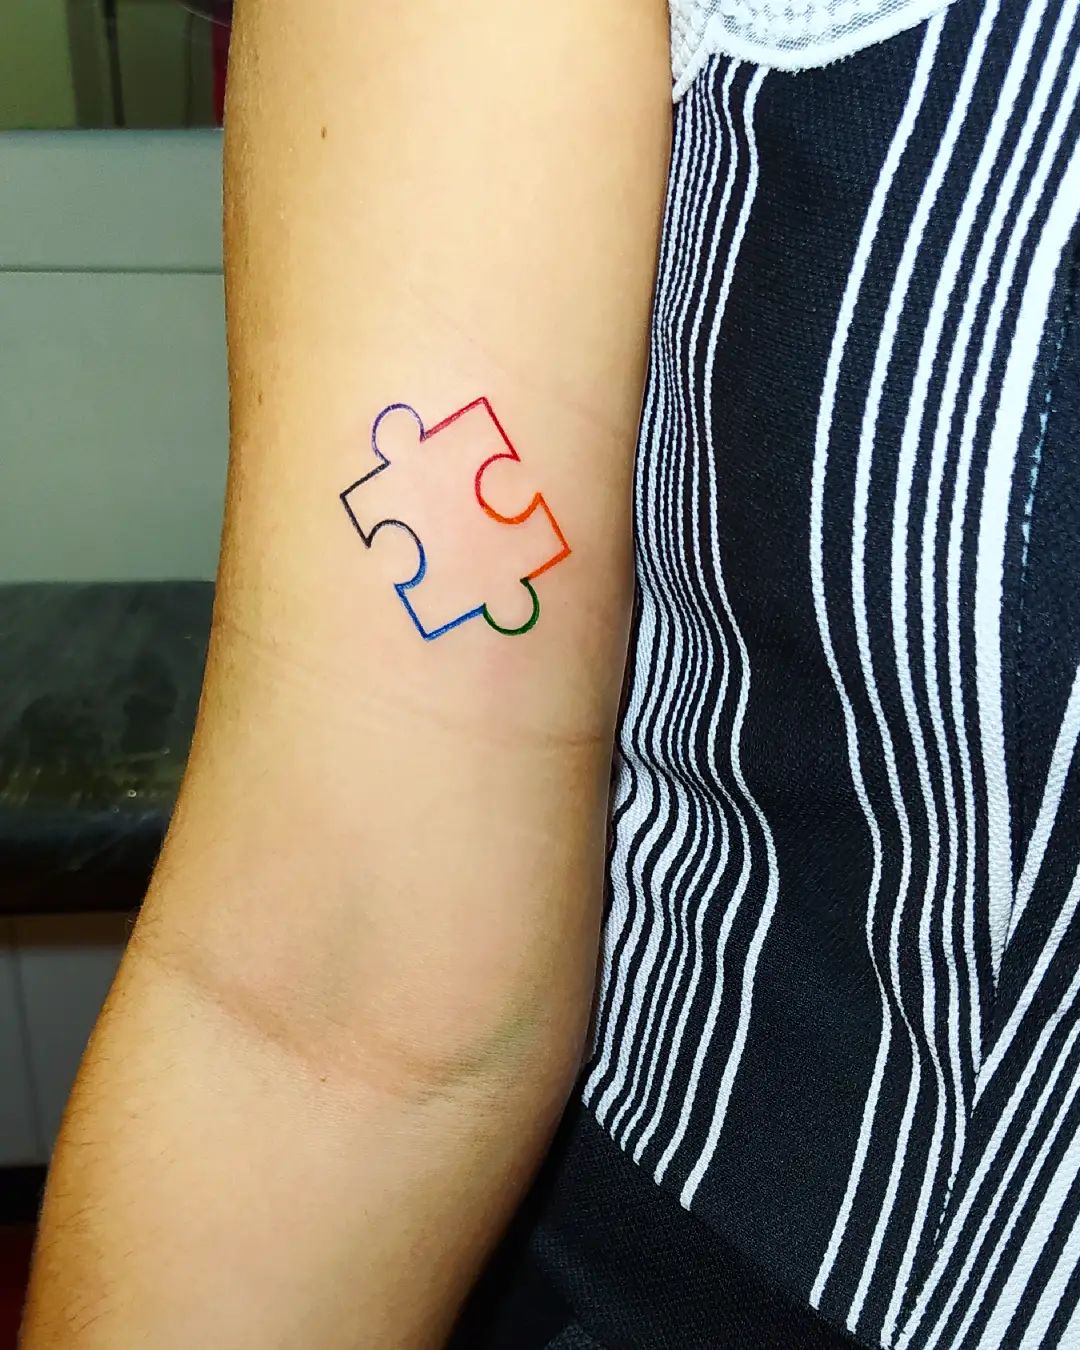 Men or women who are into minimalism will also enjoy this cute puzzle forearm tattoo.